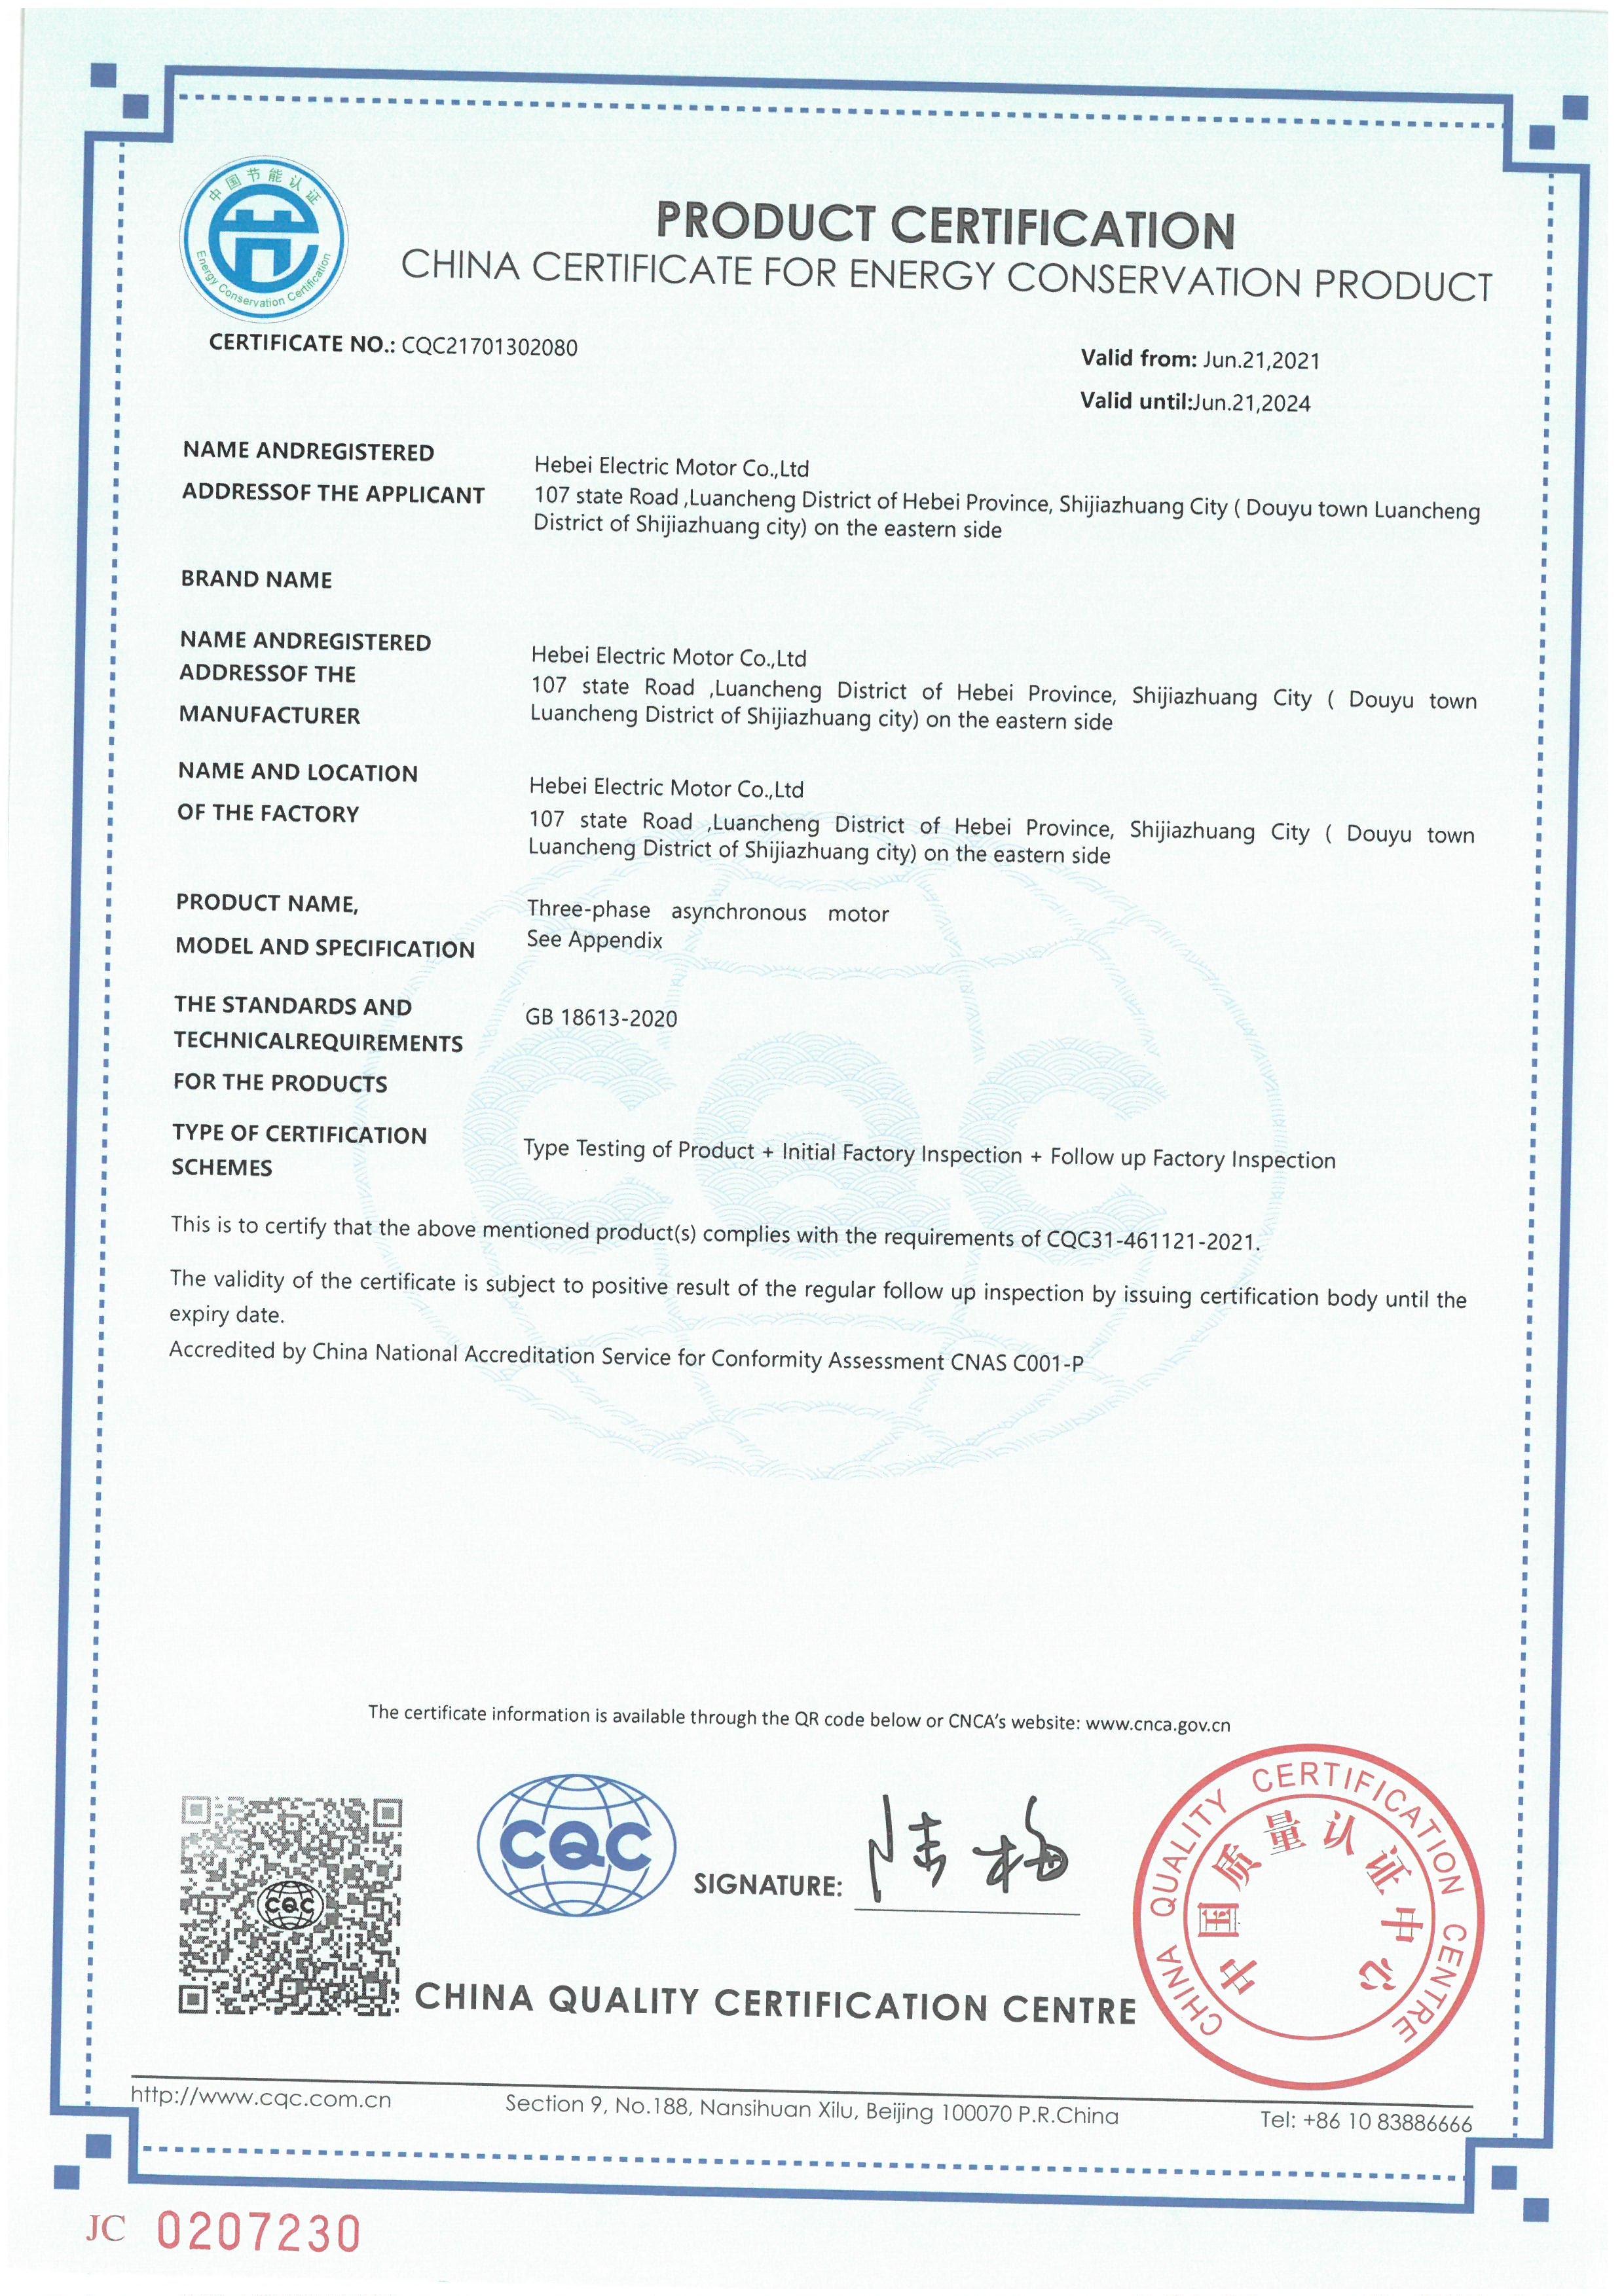 YE4 Series Motors Were Awarded “China Certificate for Energy Conservation Product”